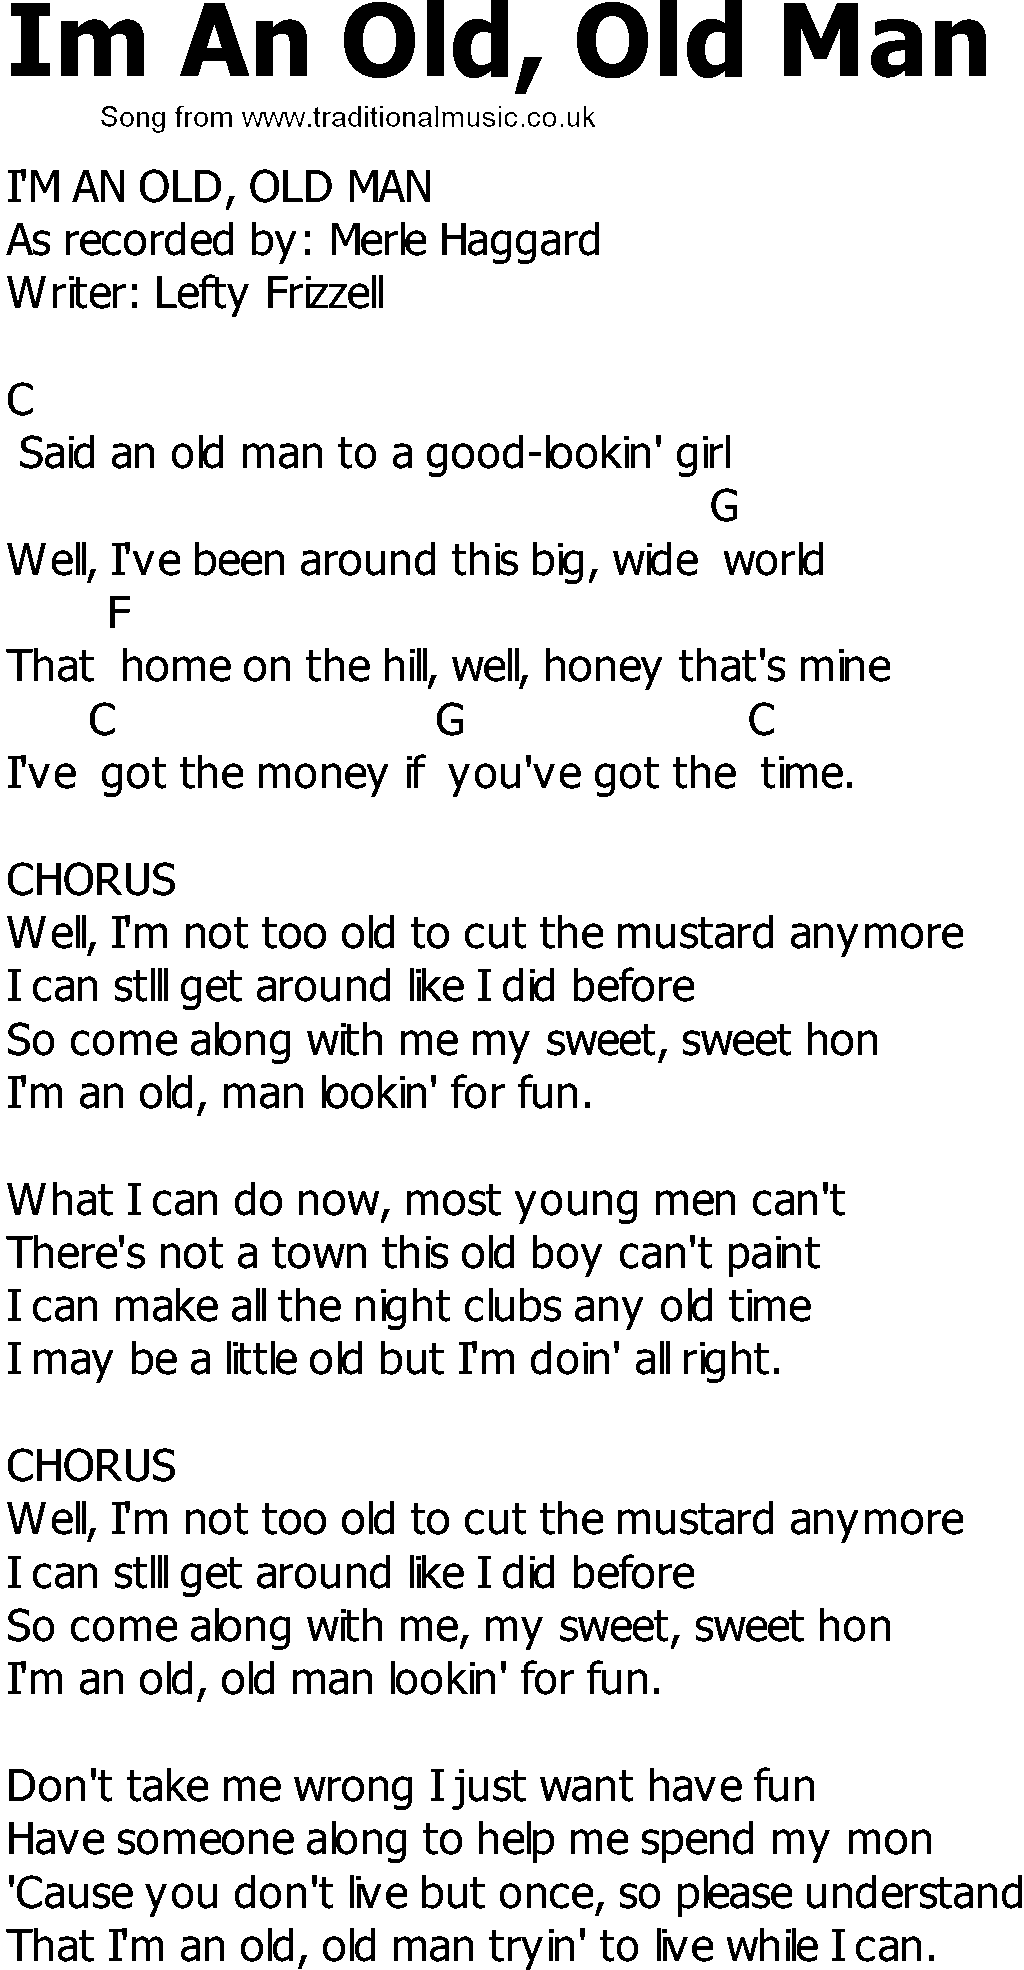 Old Country song lyrics with chords - Im An Old Old Man